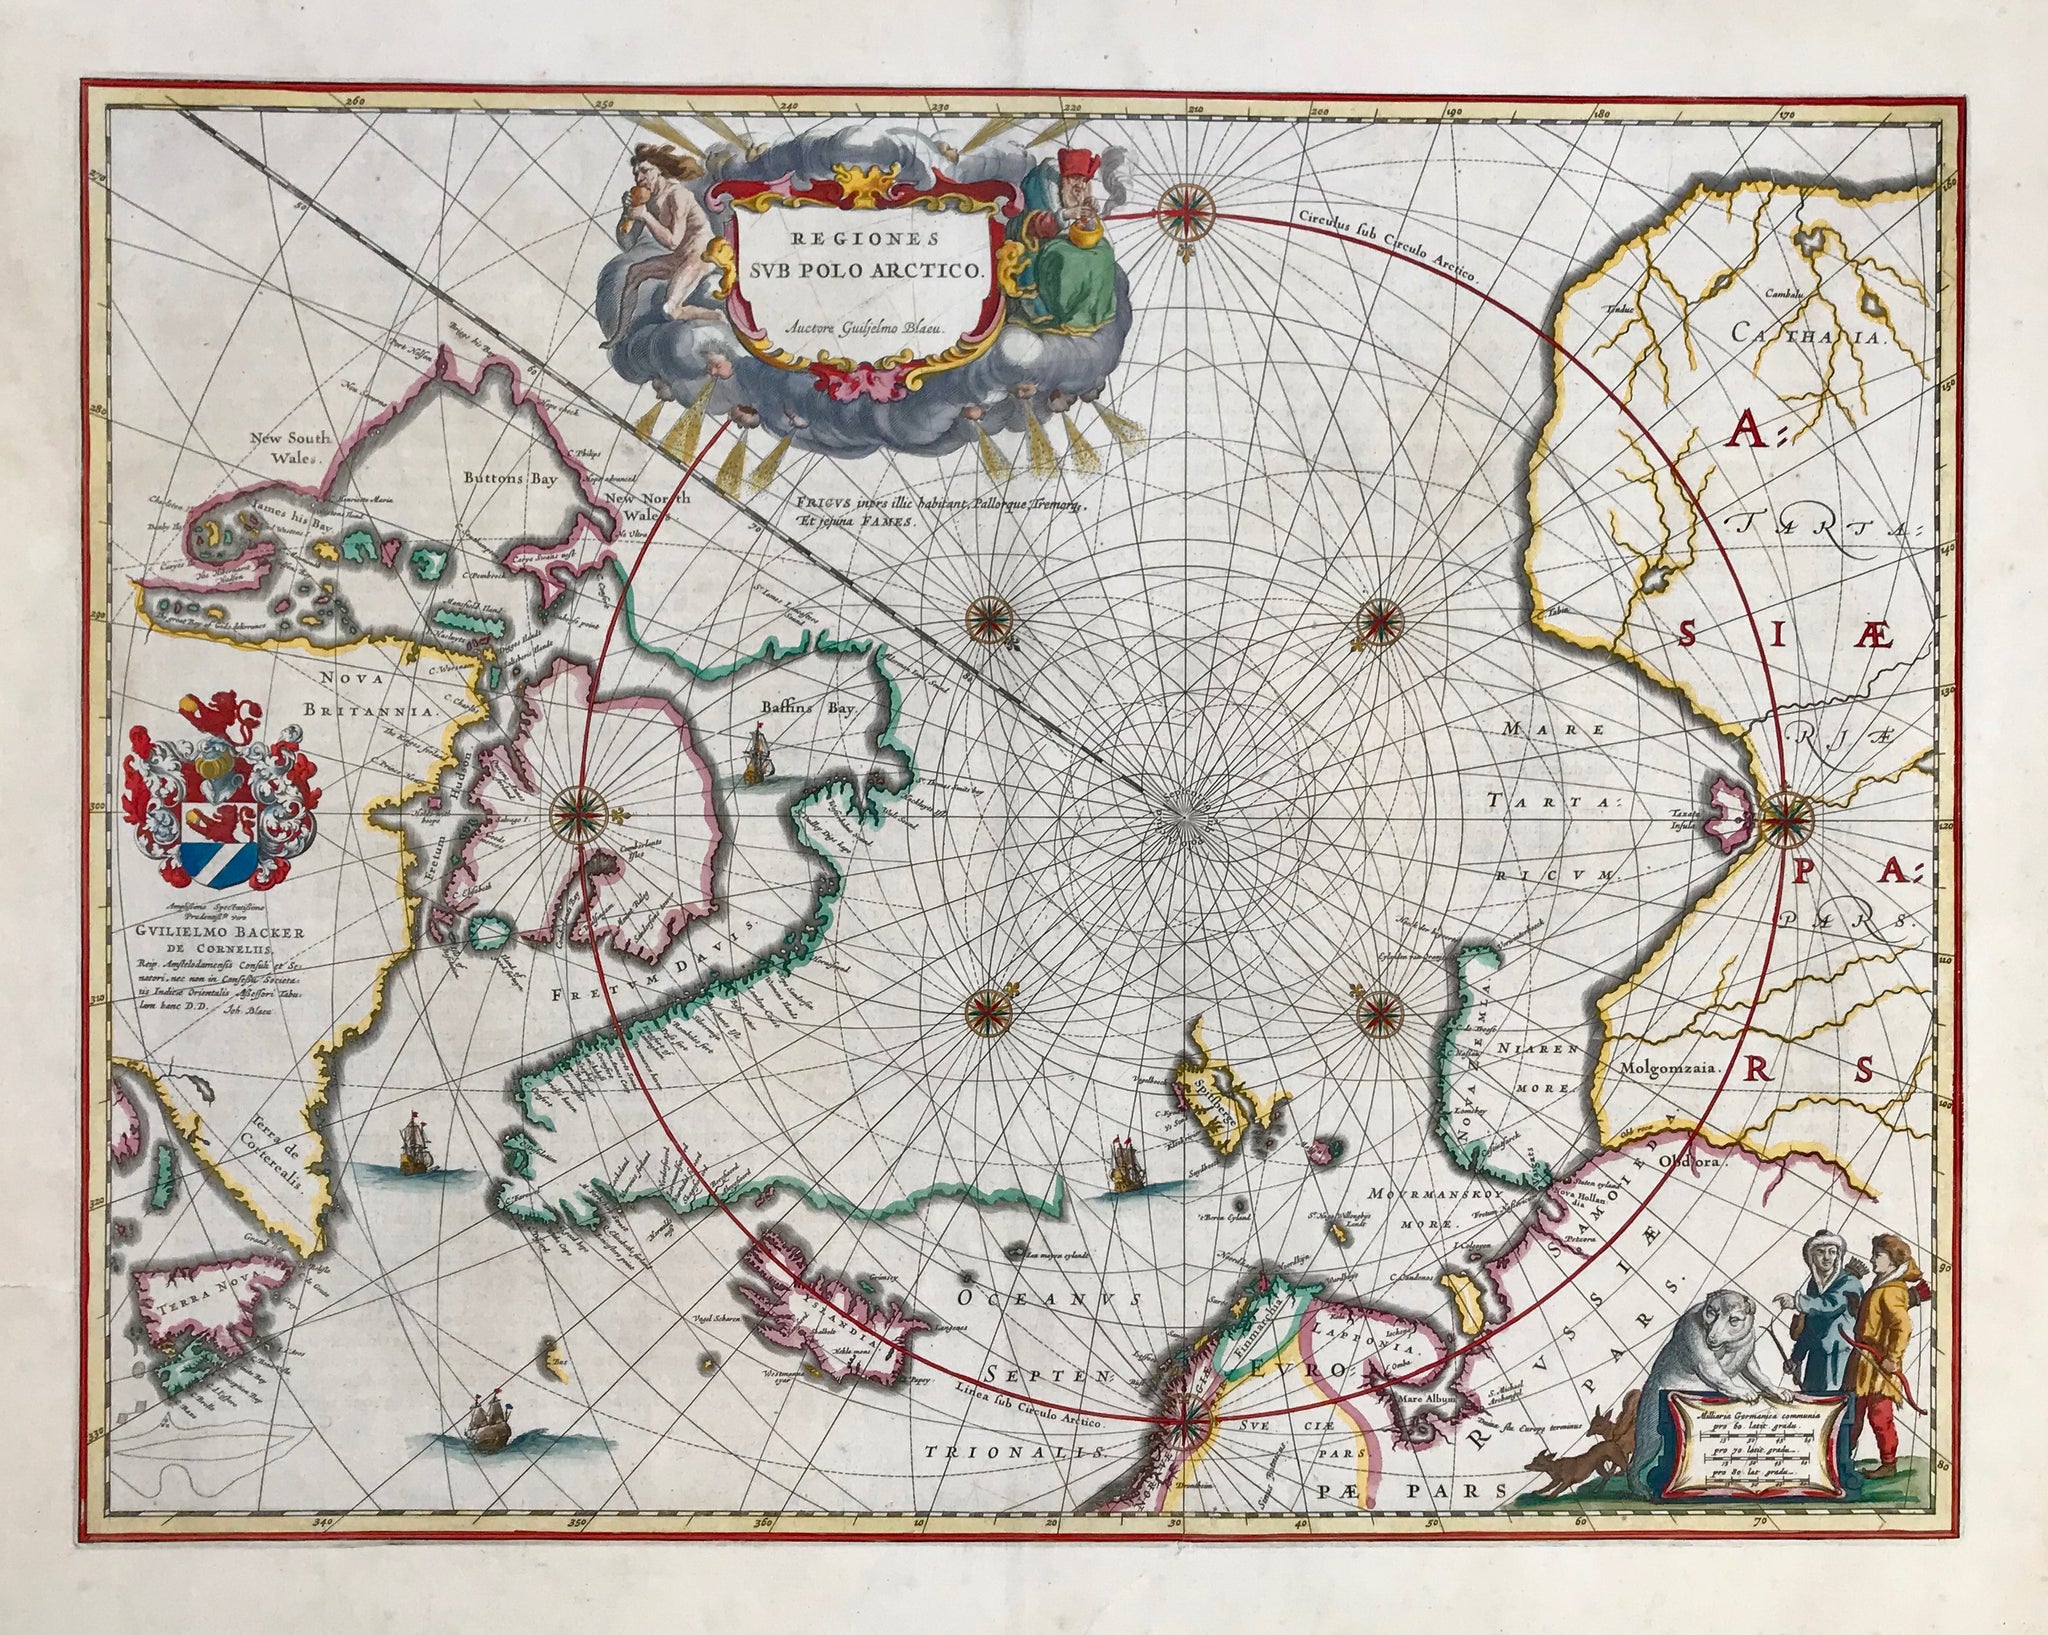 "Regiones sub Polo Artico". Copper etching by Wilhelm Janszoon Bleau. From the atlas edited by Willem Johann Bleau. Amsterdam, ca 1645. Hand coloring.  The North Pole is the center of this map which shows the coastlines of the countries in the Artic Circle.The decorative title cartouche is in the upper part of the map with cherubs and personifications of the wind and winter. 